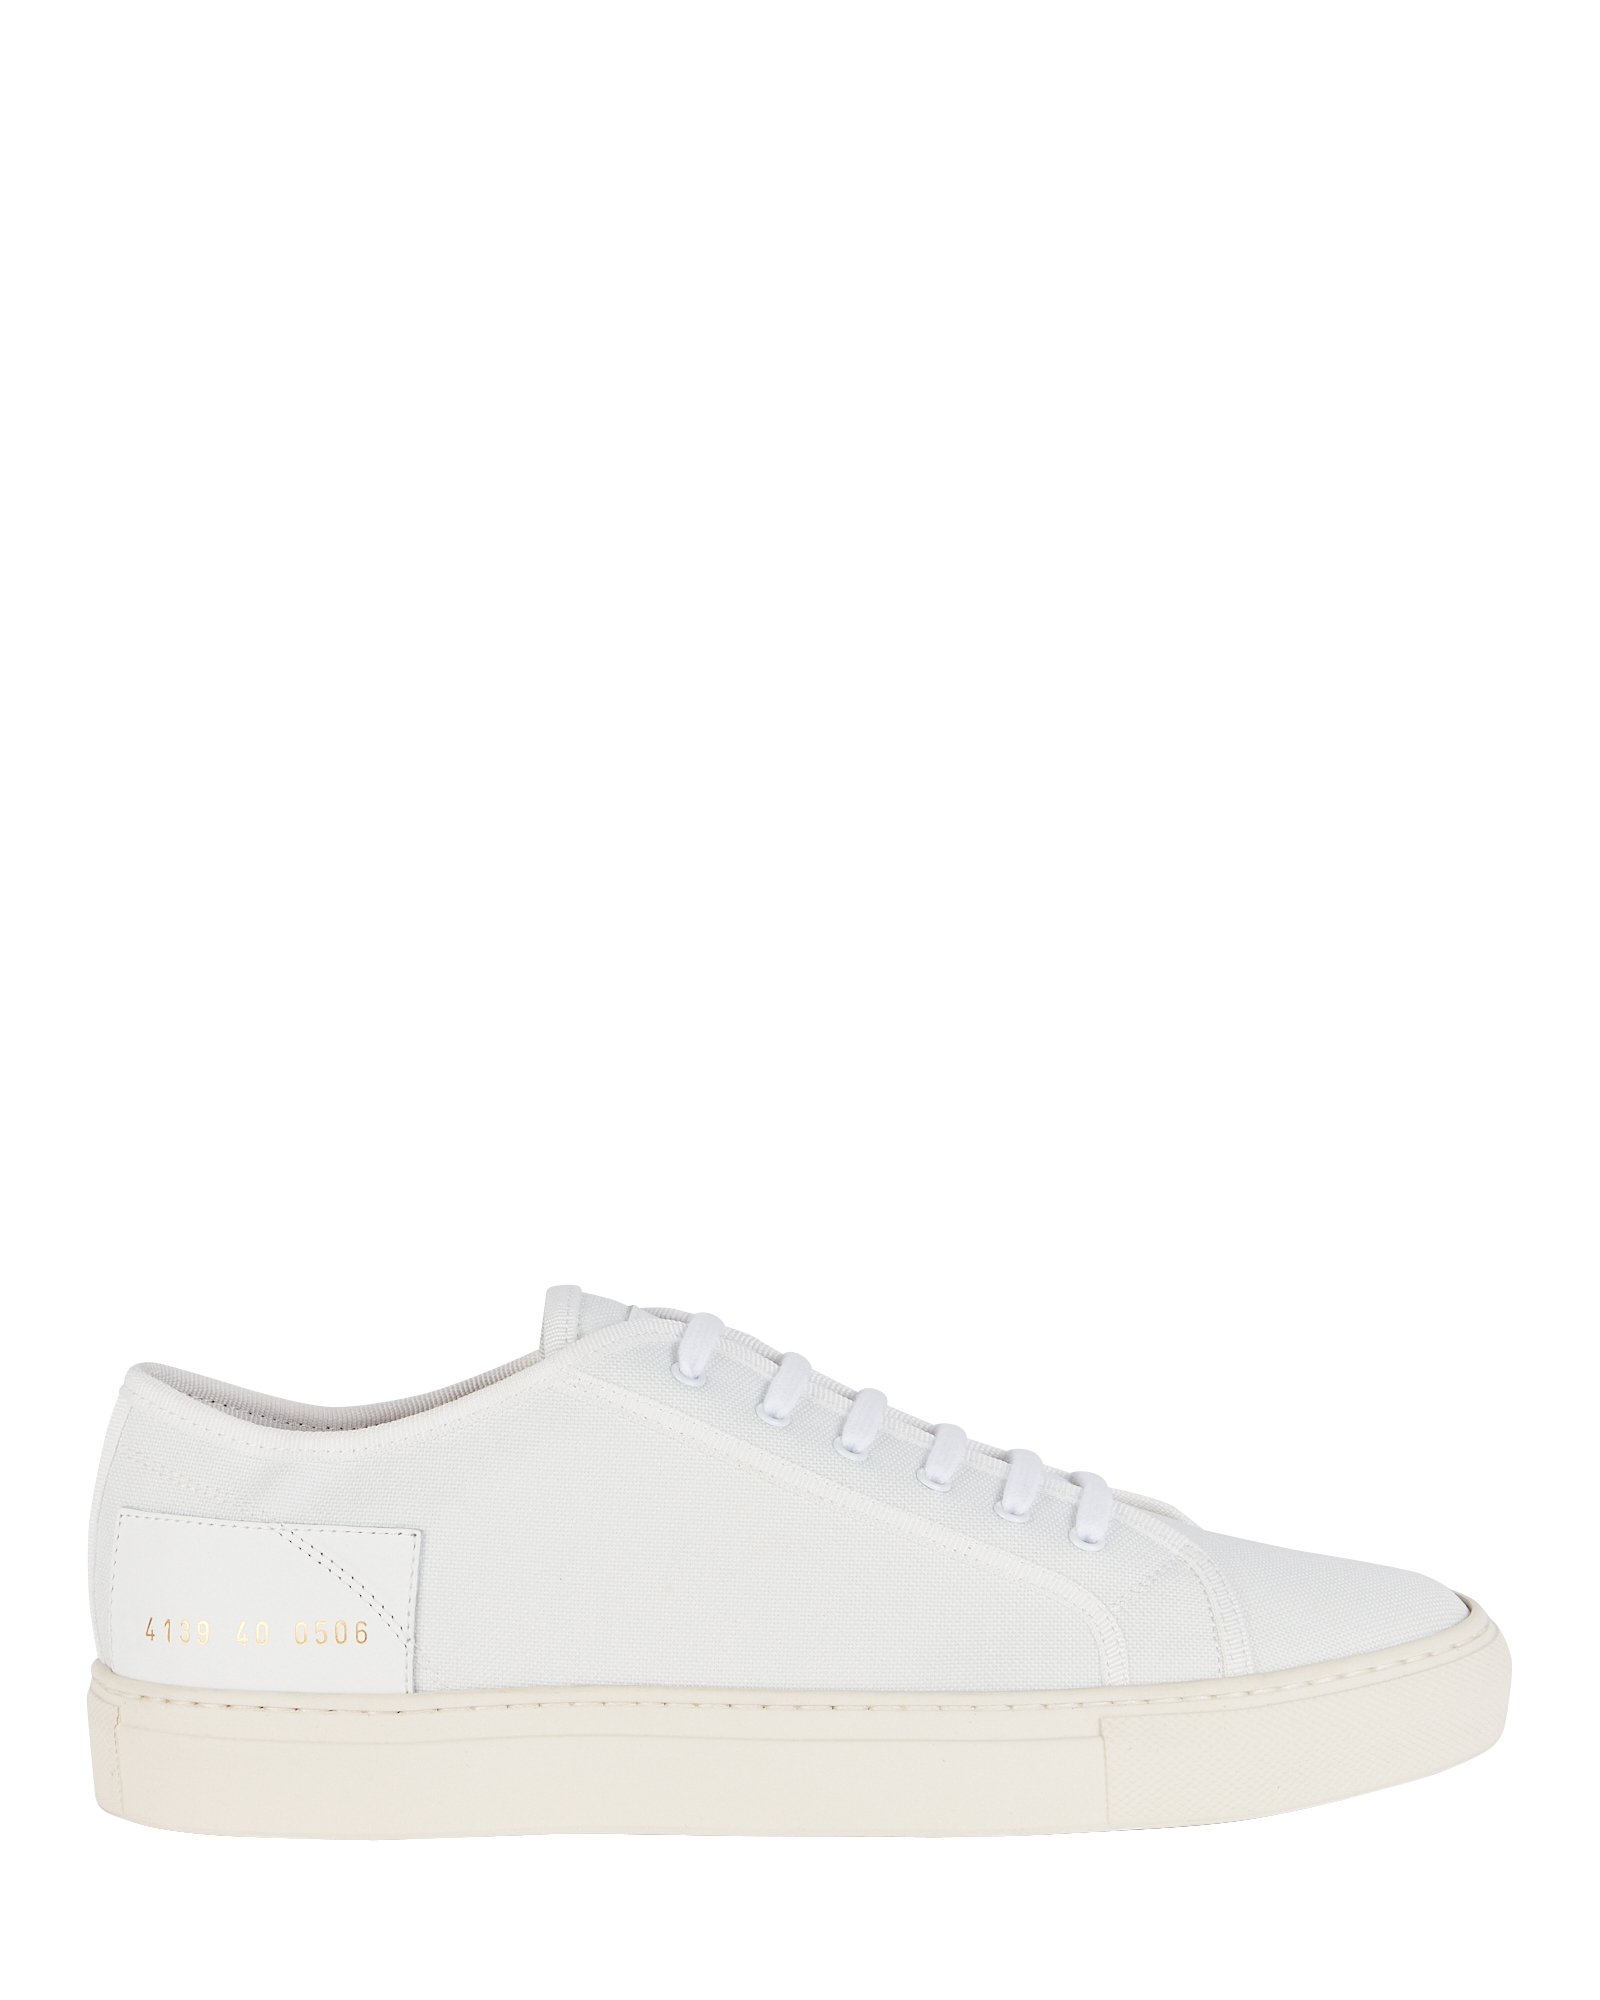 Common Projects Tournament Low-Top Canvas Sneakers | INTERMIX®